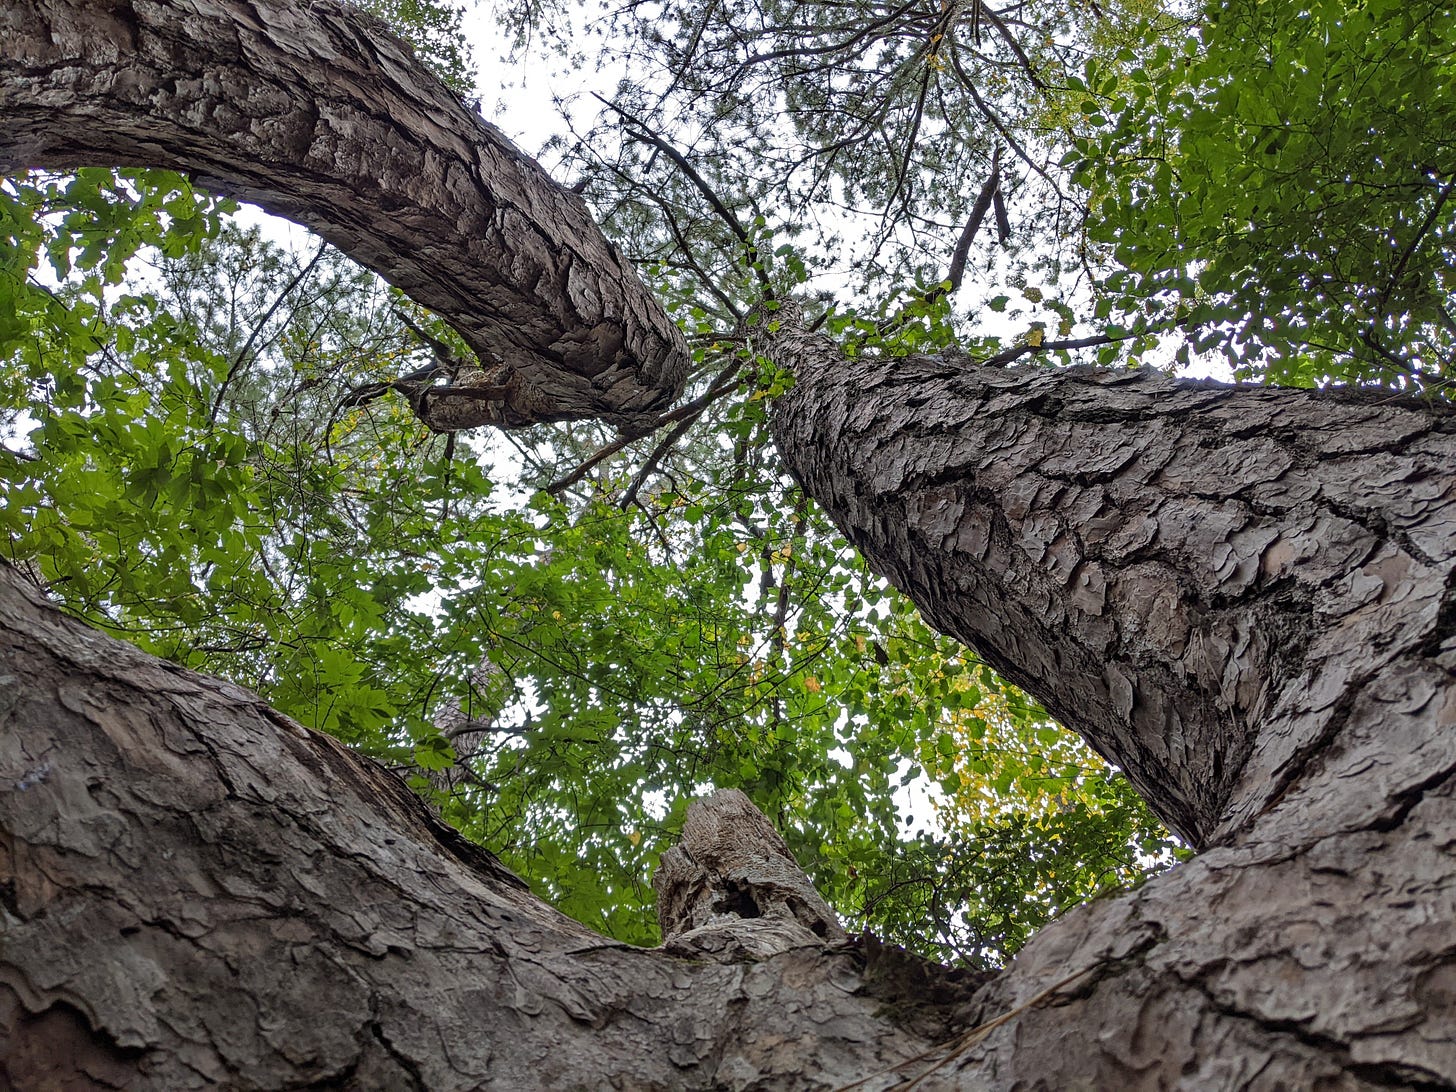 Photo of a bifurcated pine tree trunk. The camera is on the trunk looking up. The two trunks seem to start / curve far apart and then come together as they ascend towards the canopy.